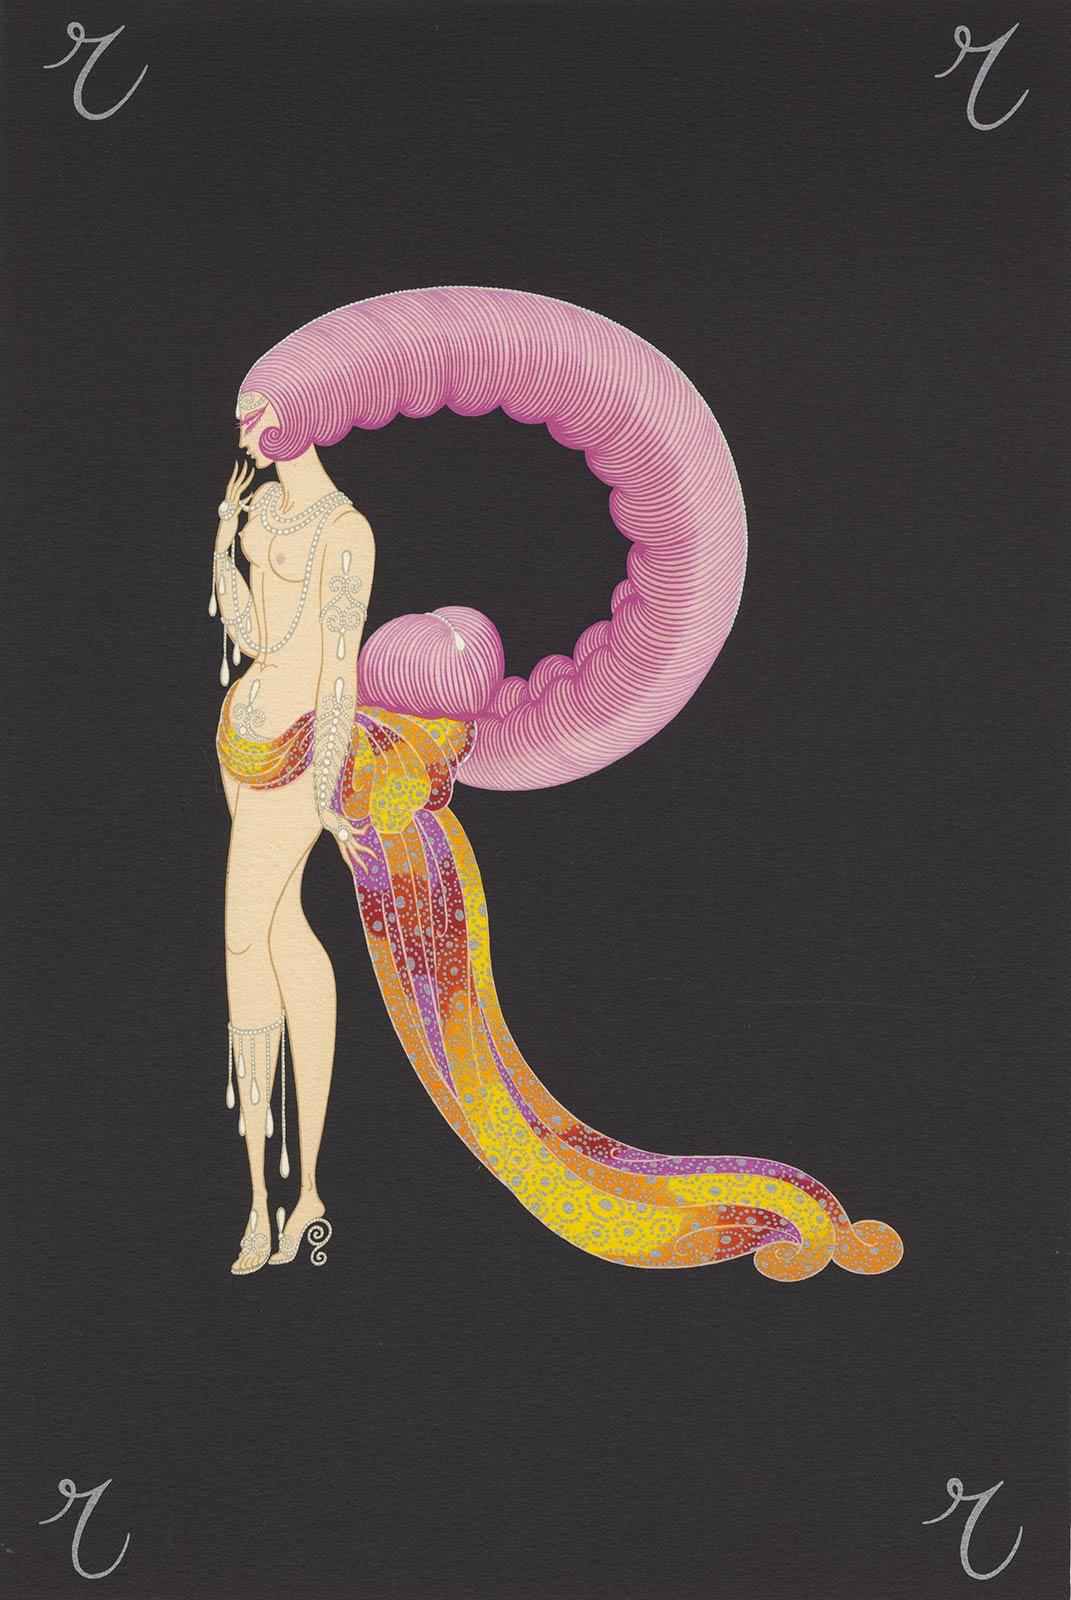 Erté Portrait Print - The Letter R from Alphabet Suite (R in form of glamorous showgirl with headdress